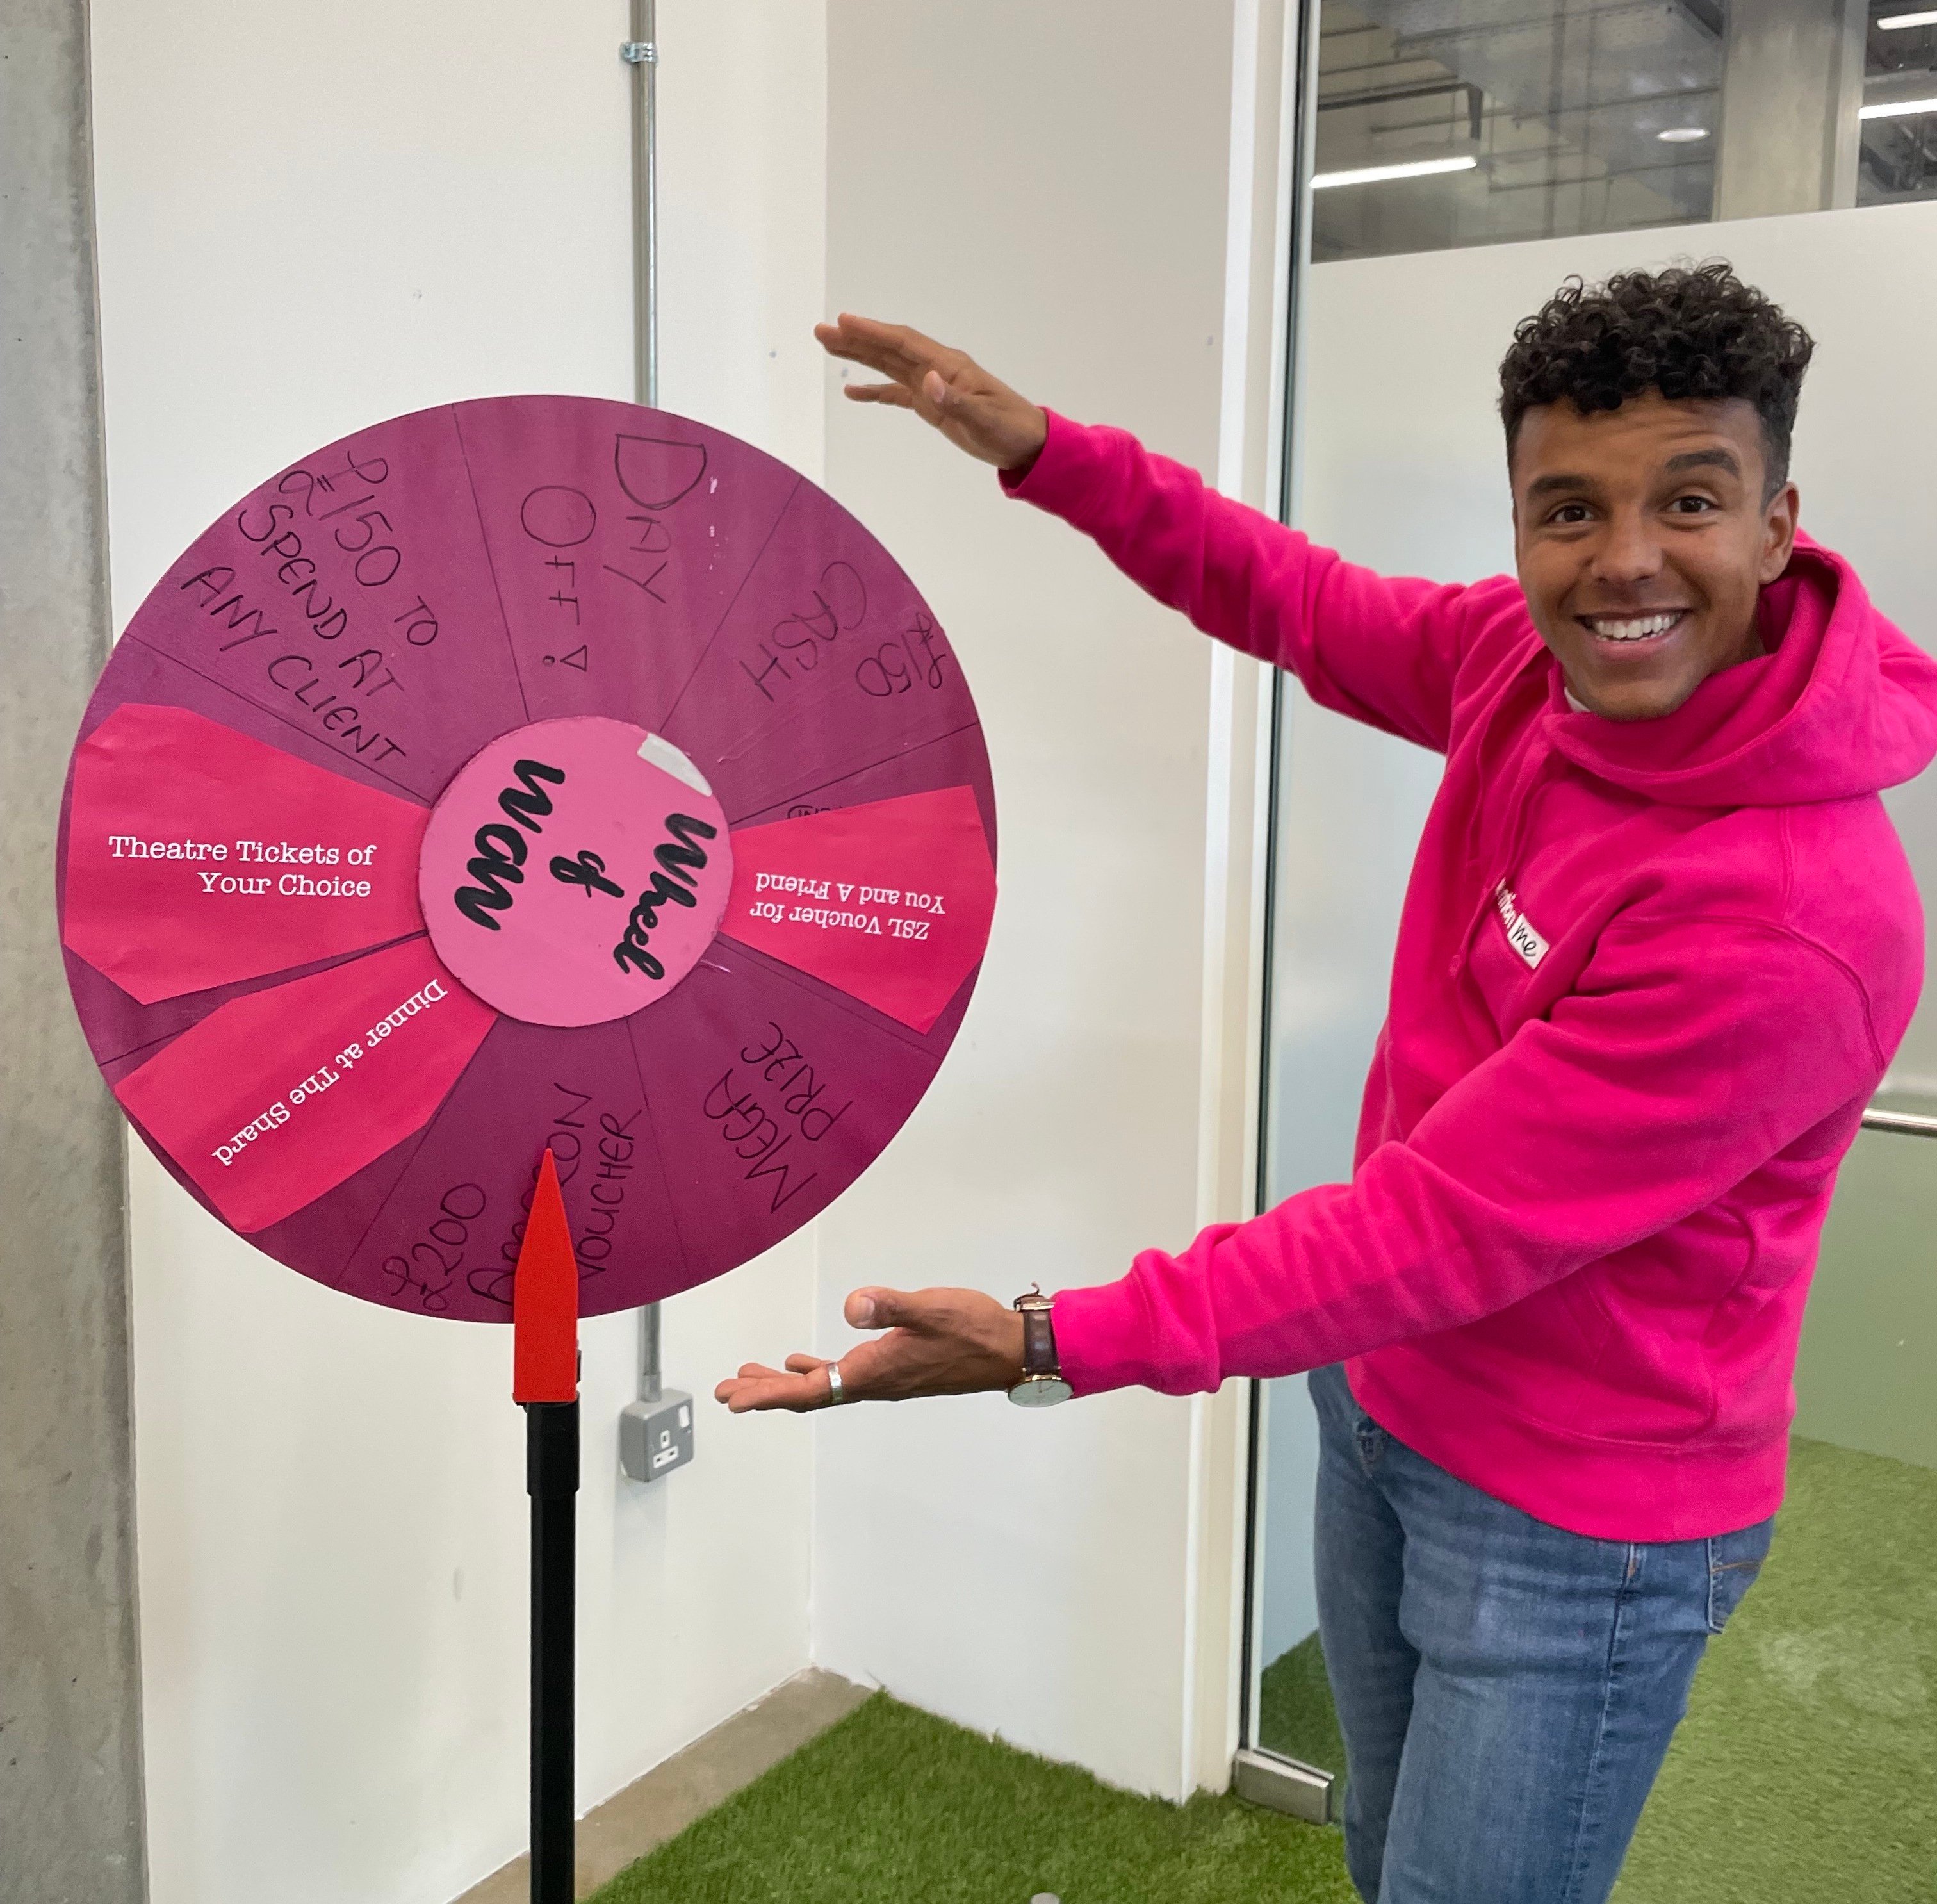 Dom poses with Mention Me's "Wheel of Wow"